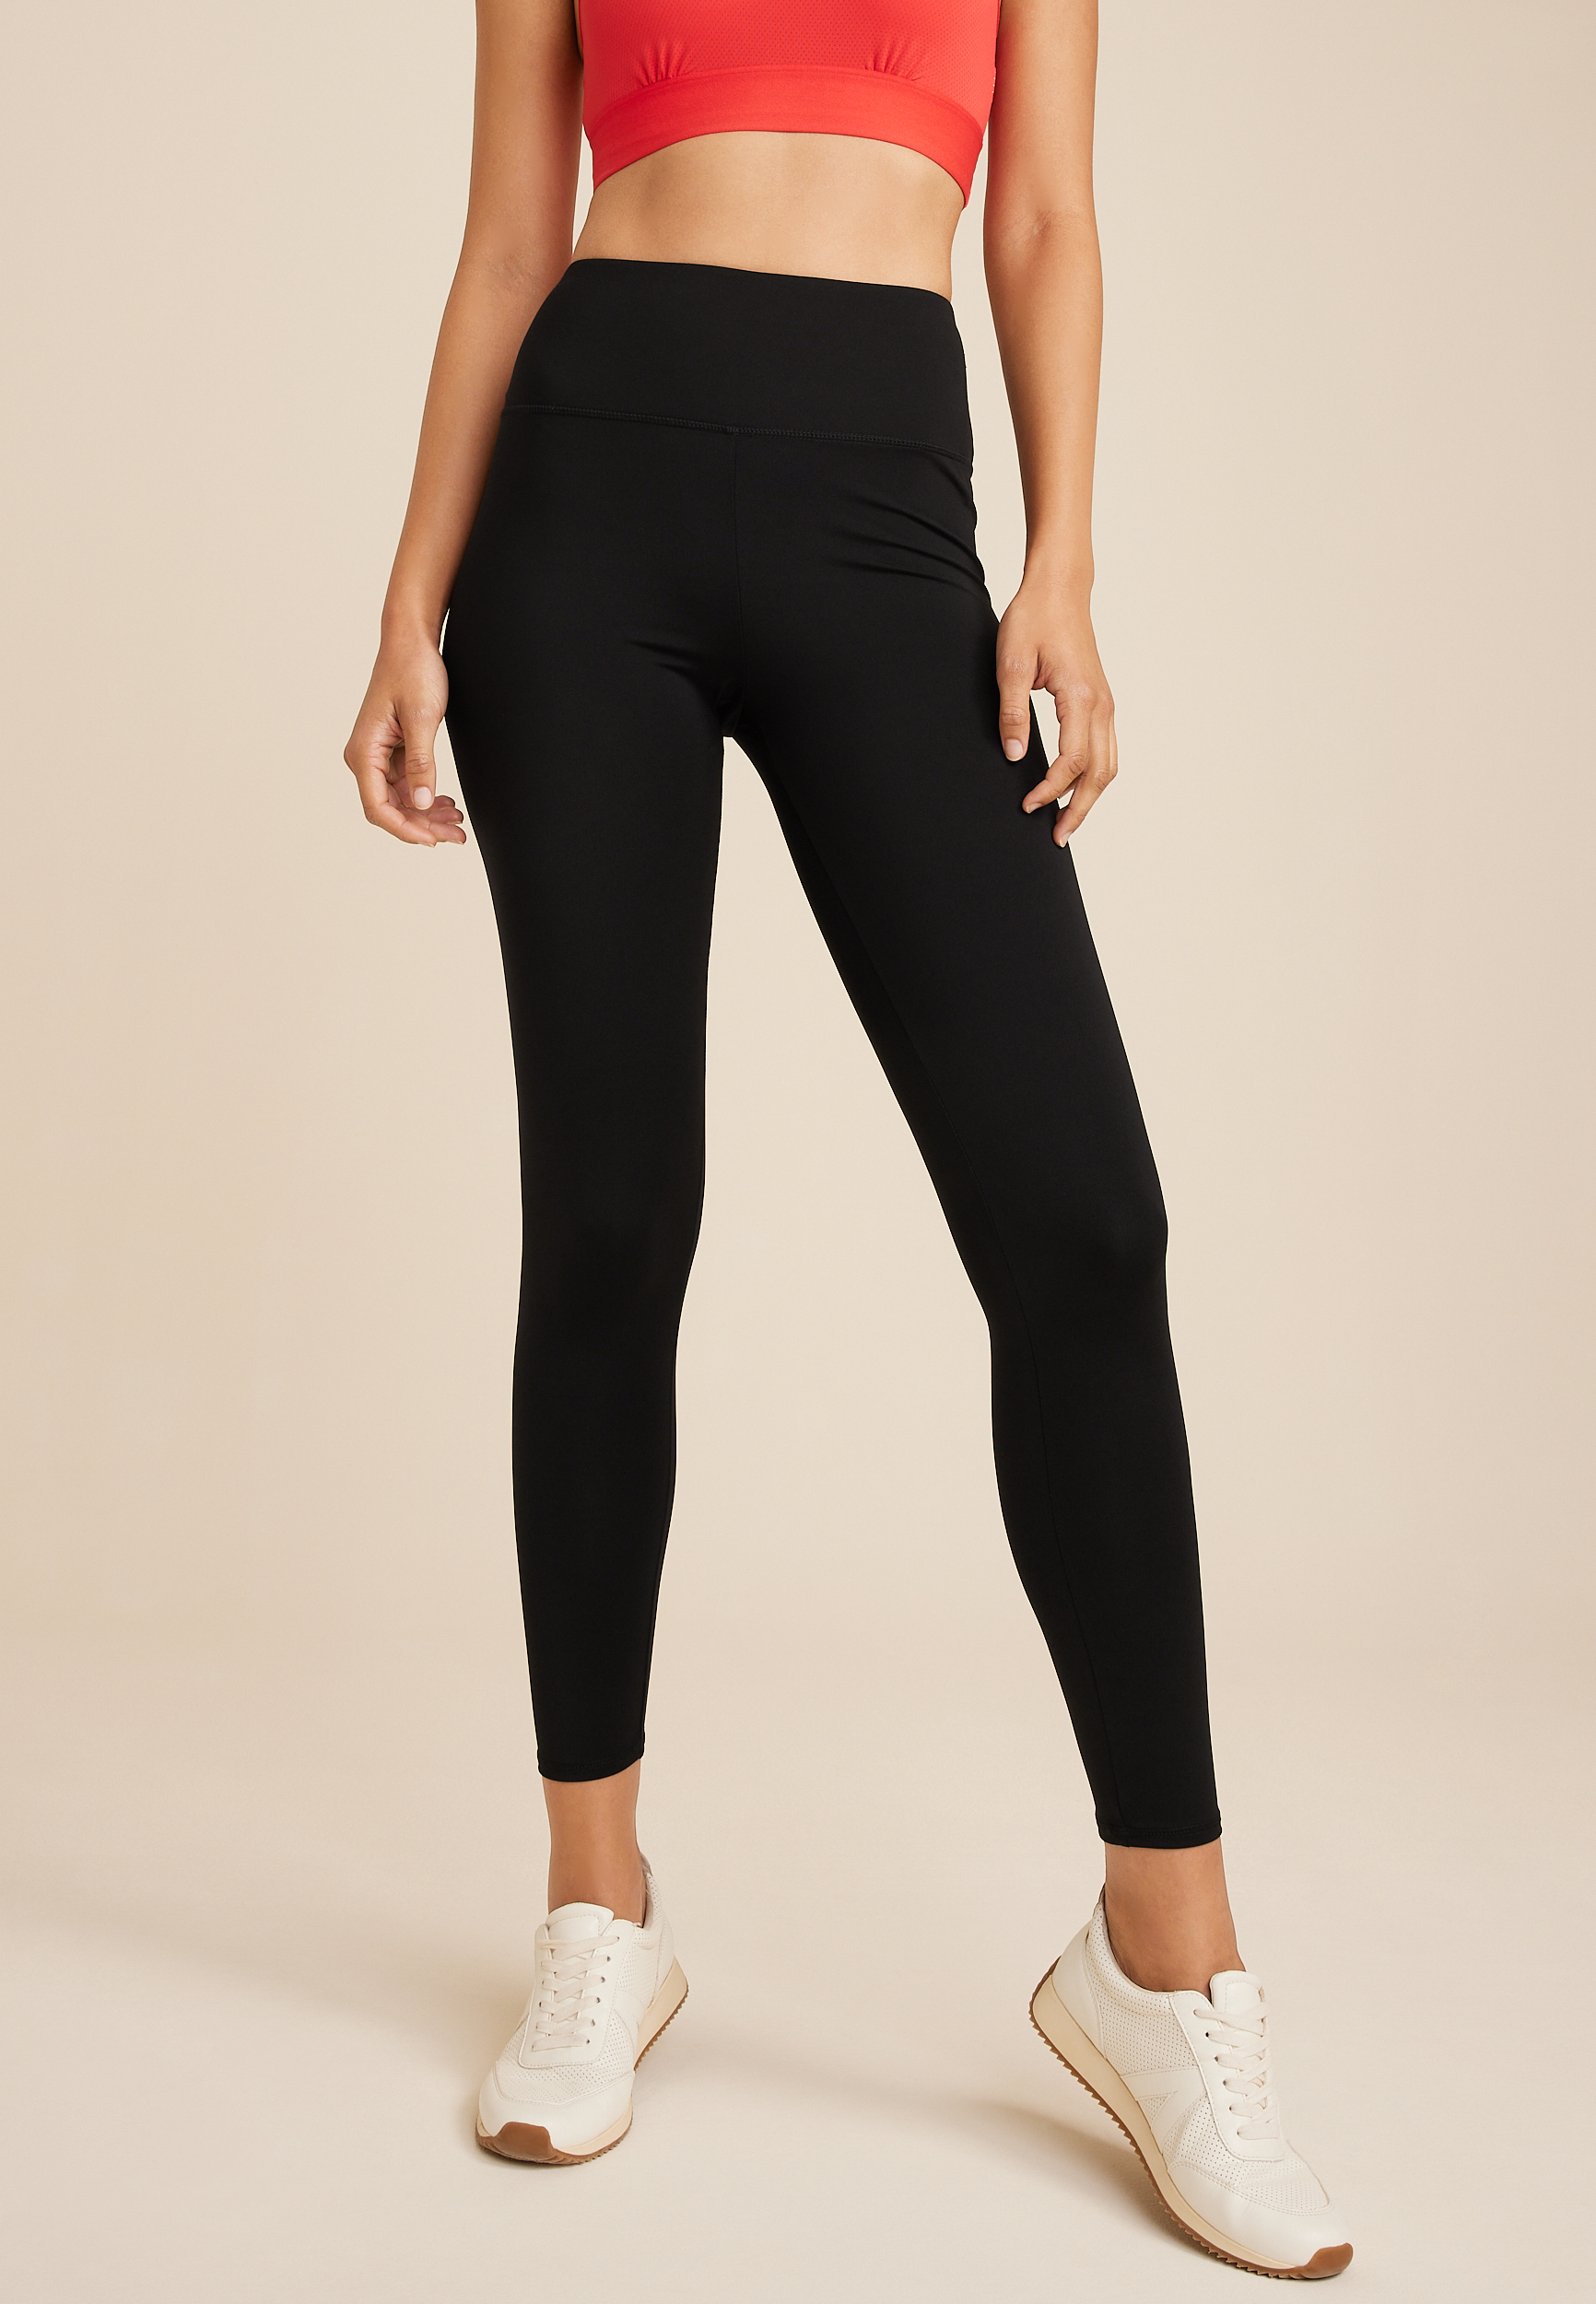 Maurices Polyester Active Pants, Tights & Leggings